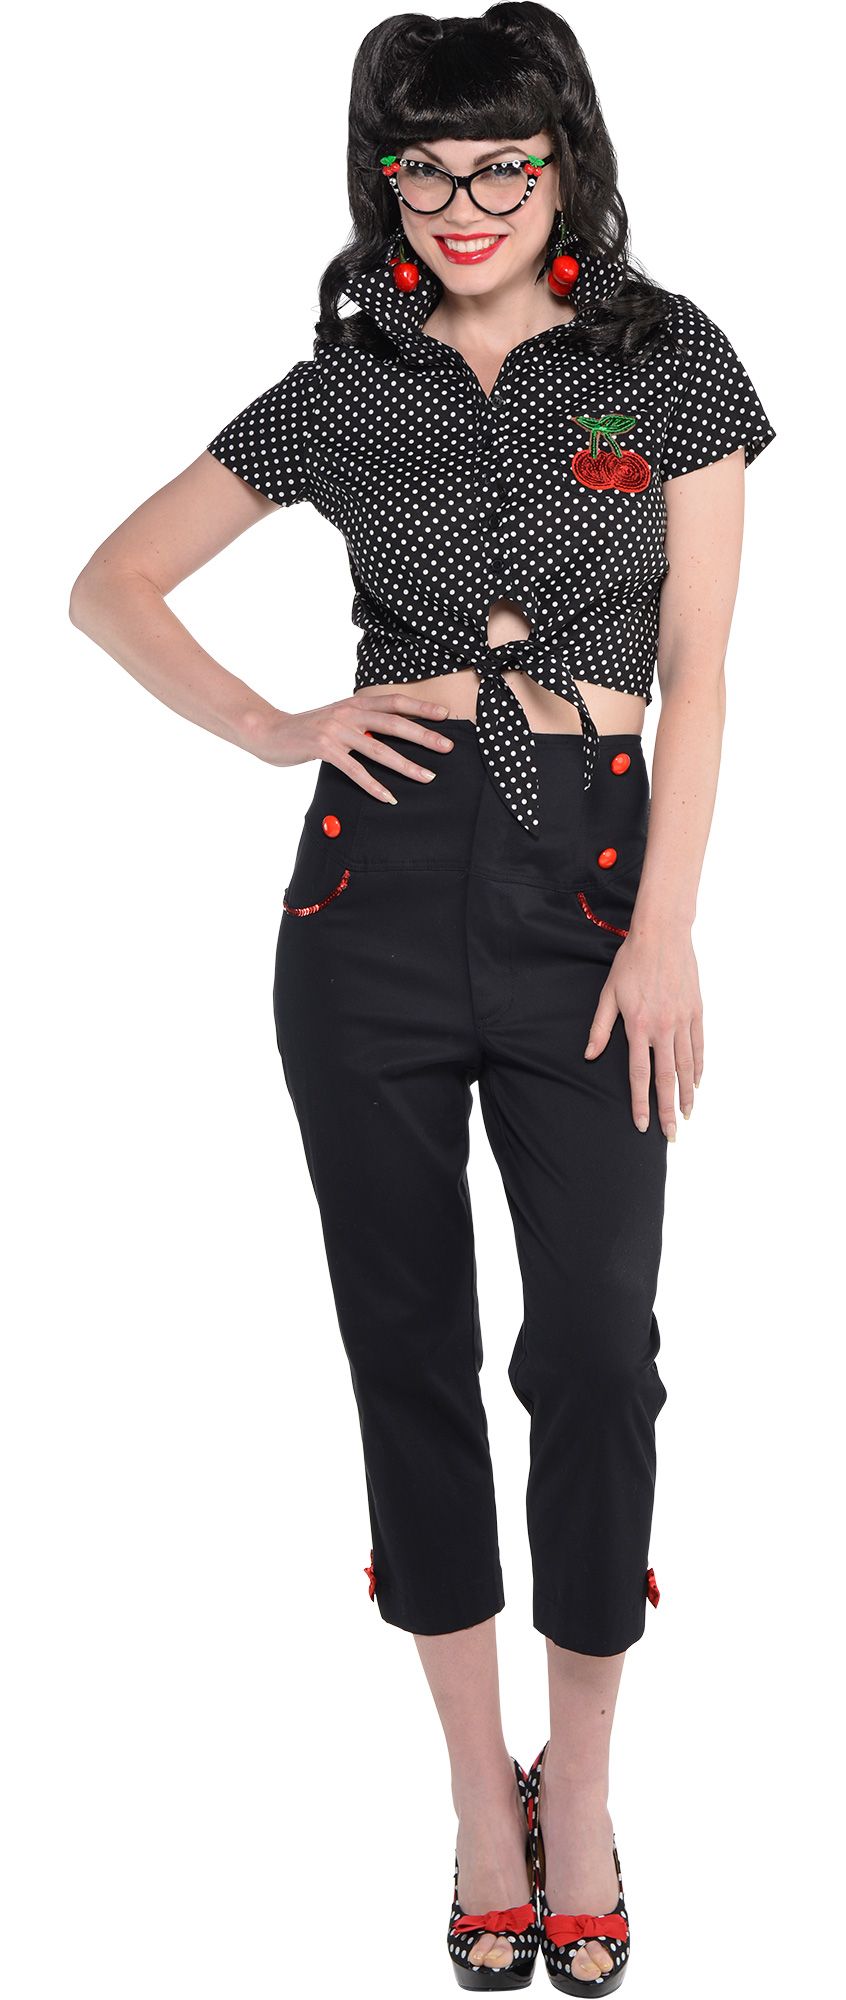 Create Your Own Women's Rockabilly Costume Accessories - Party City